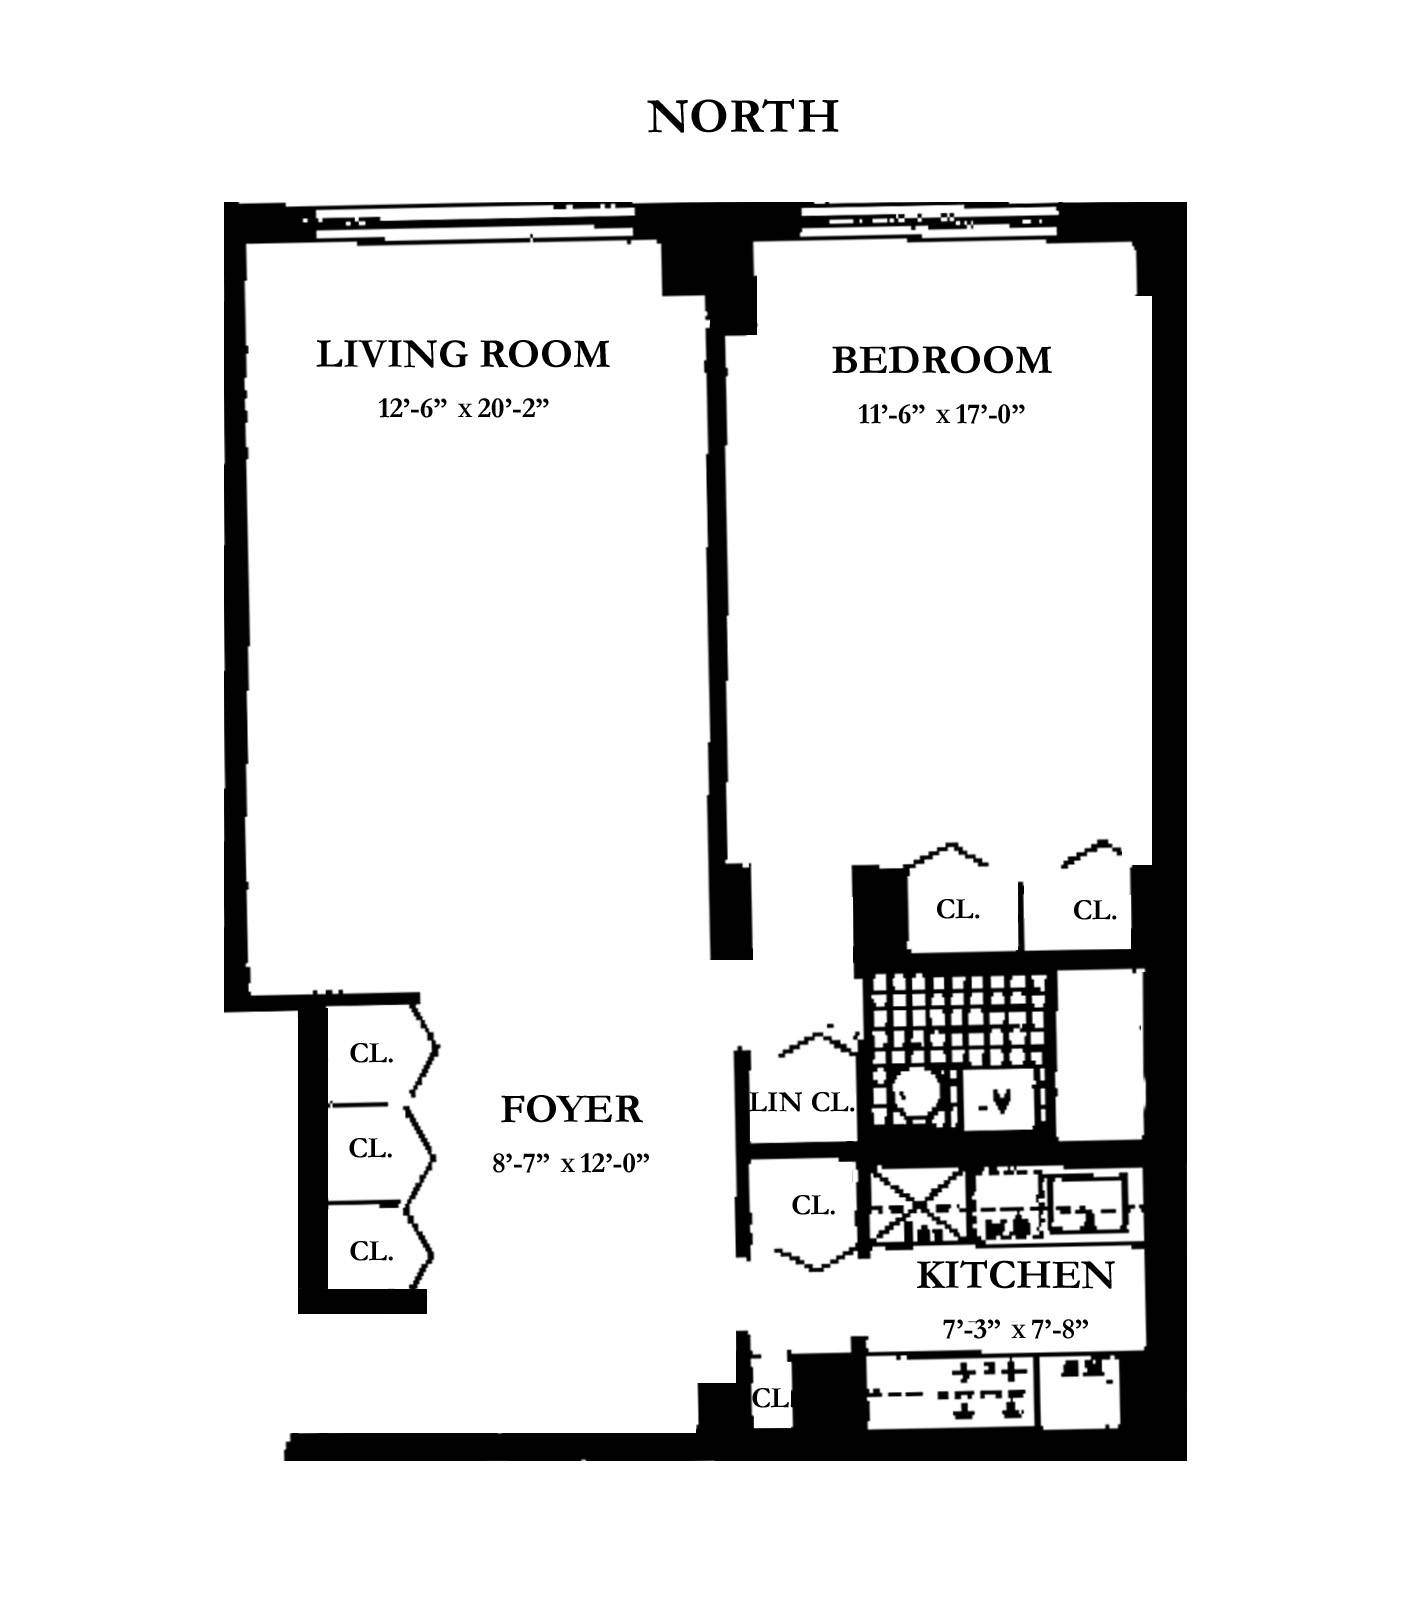 LARGE 1 BED 1 BATH CO-OP W NO BOARD OFF FIFTH AVE 